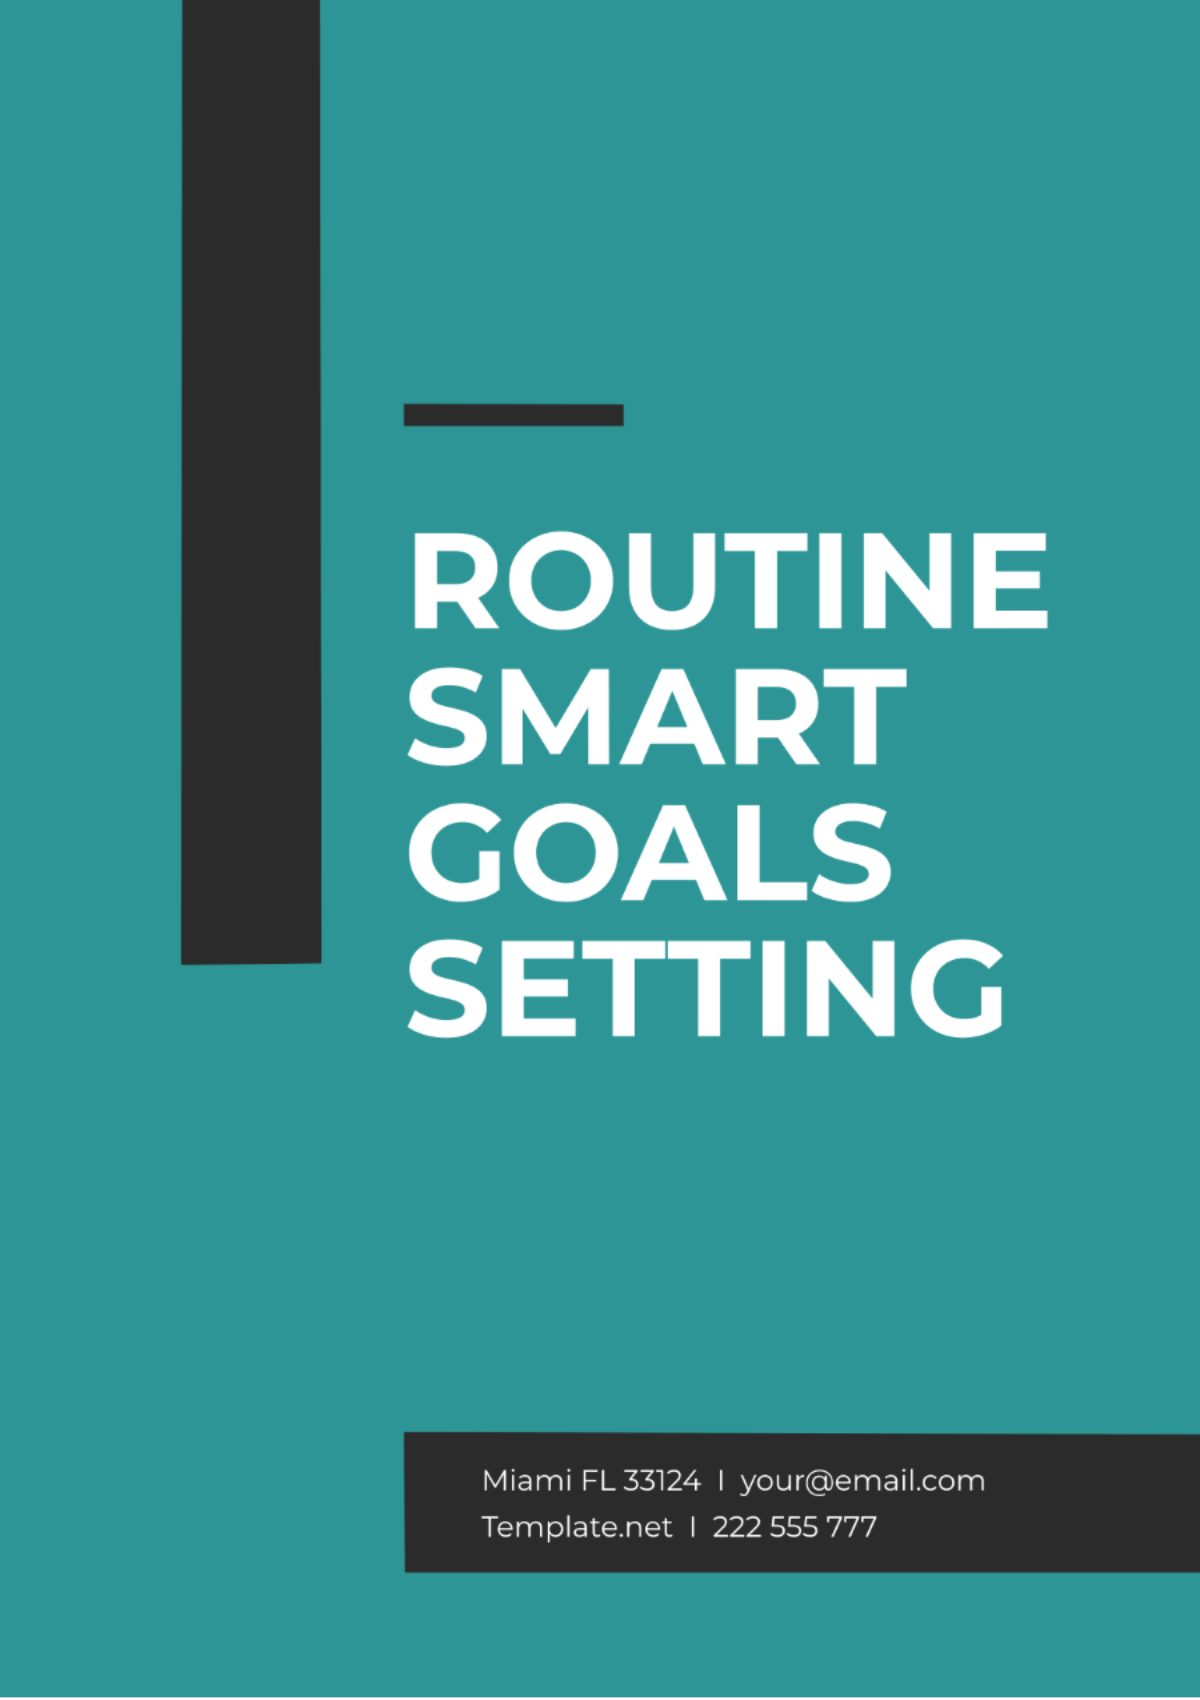 Routine SMART Goal Setting Template